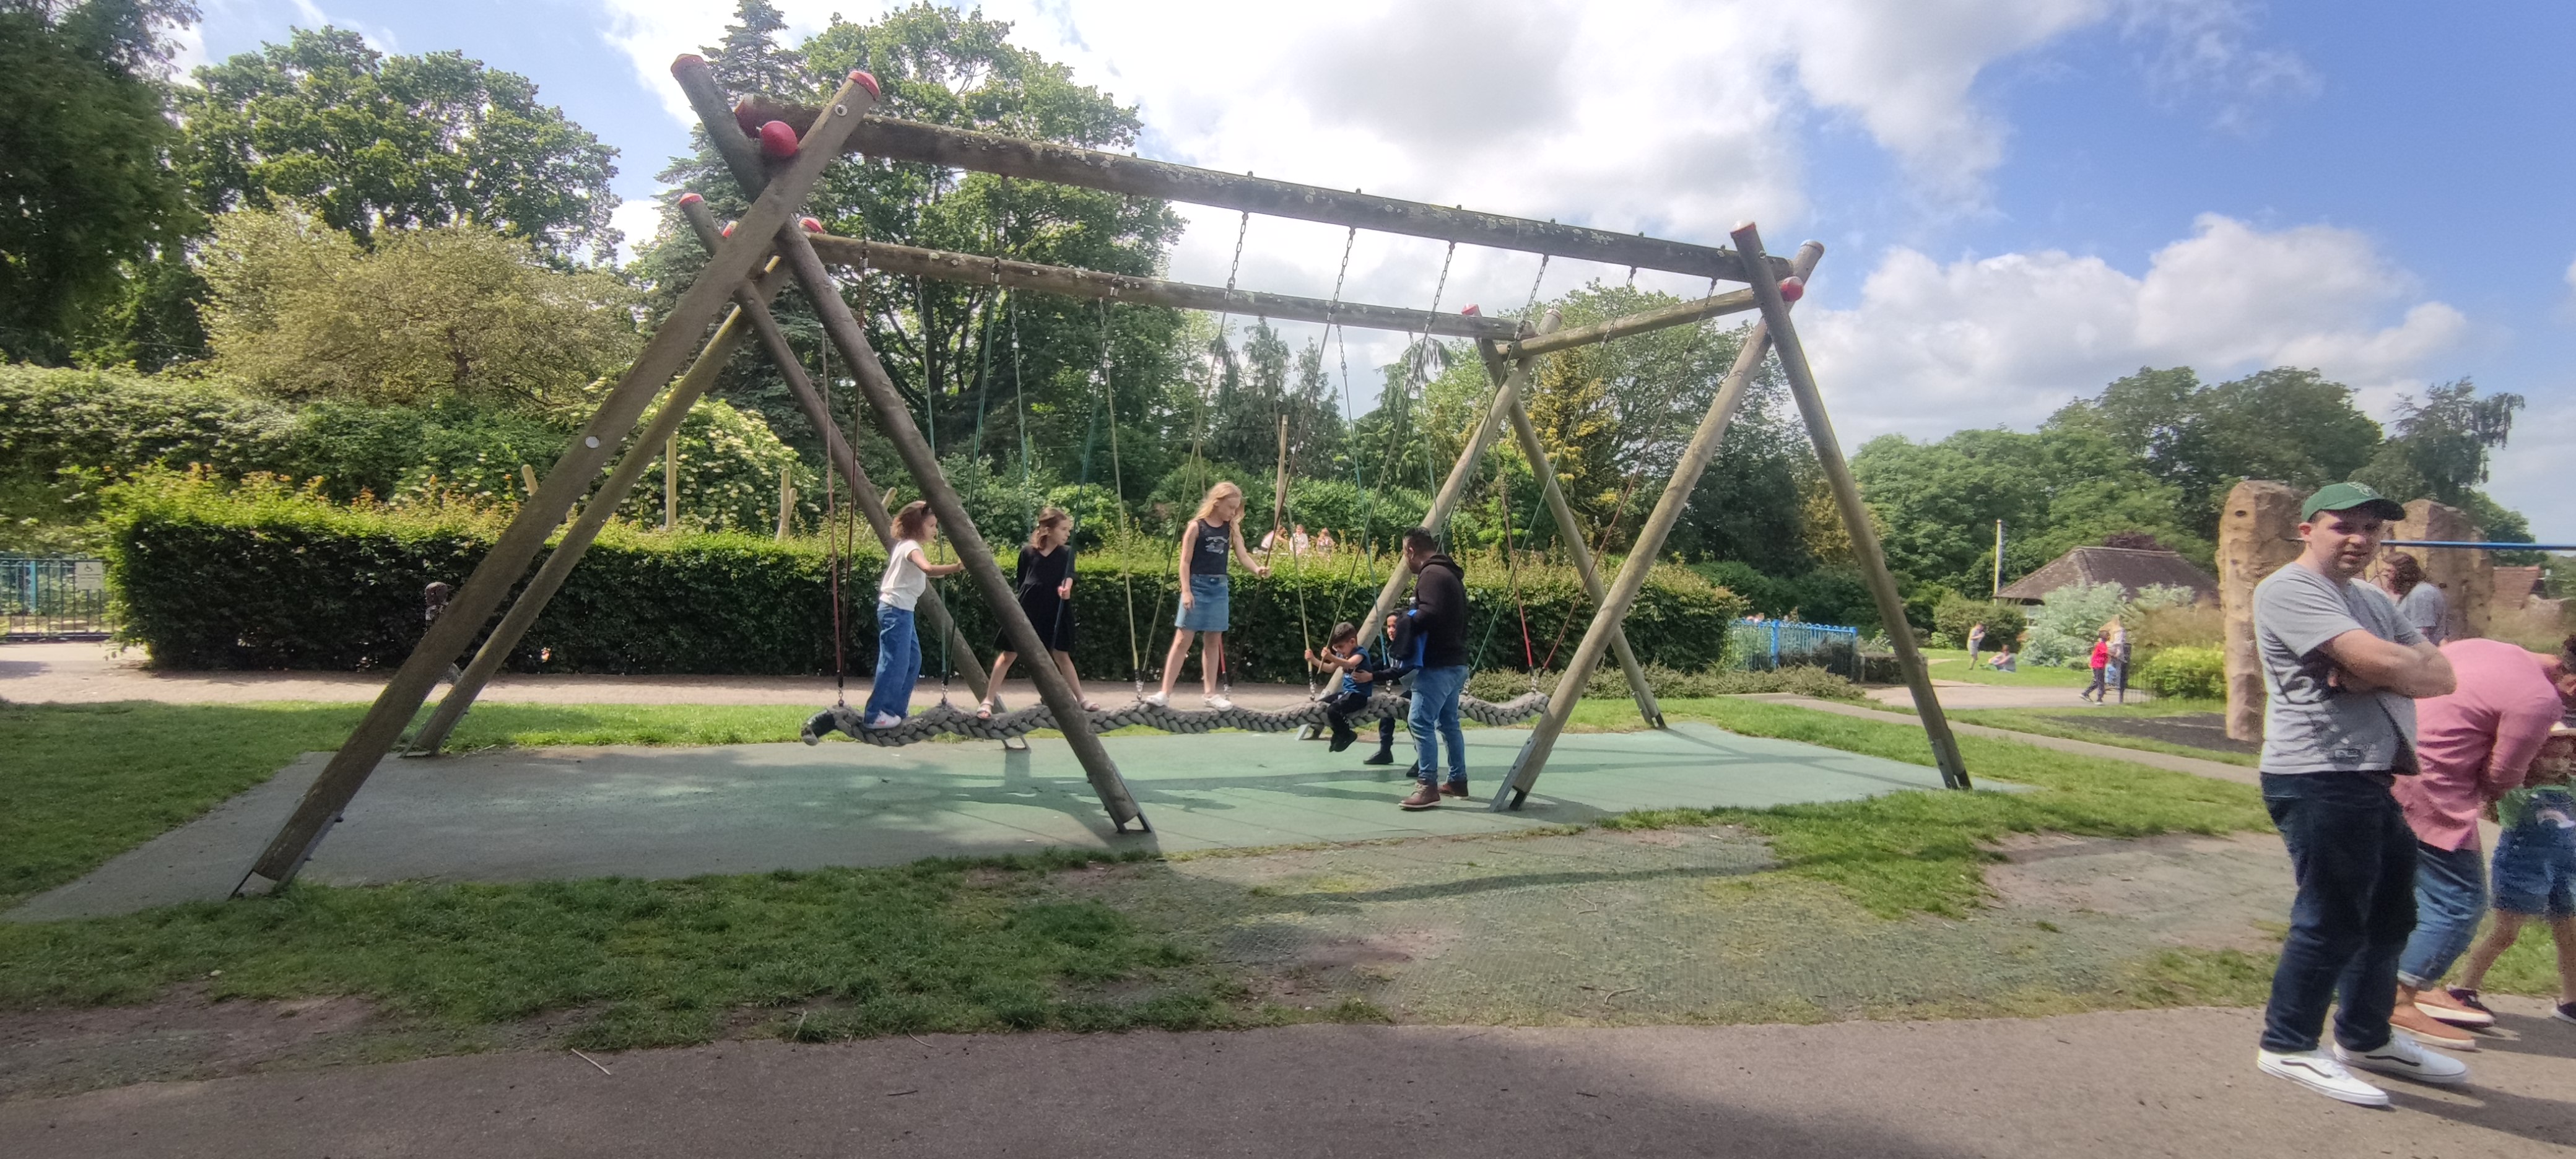 a group of people on a swing set